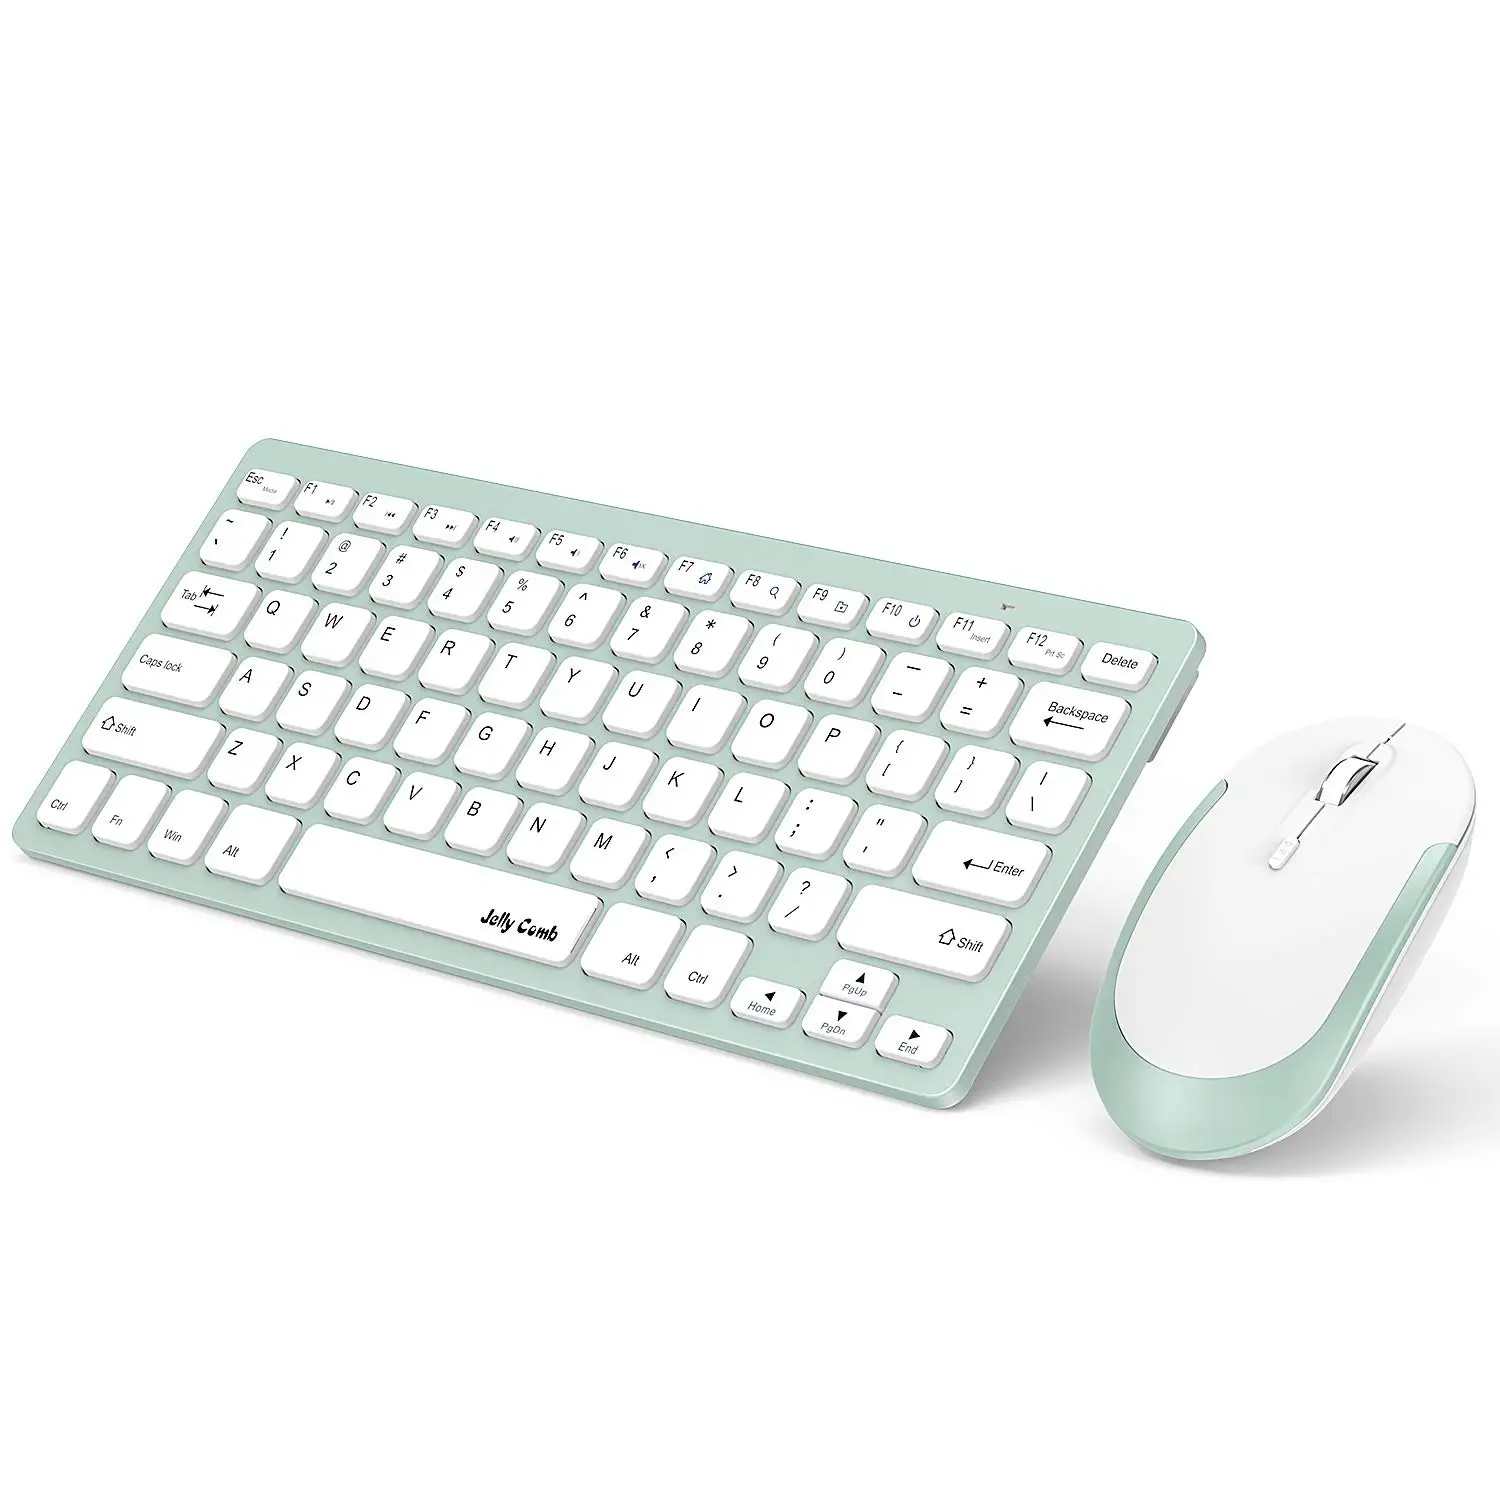 

Jelly Comb Wireless keyboard and Mouse Combo 2.4G Slim Keyboard and Mouse Set for Windows Laptop Notebook-White and Mint Green